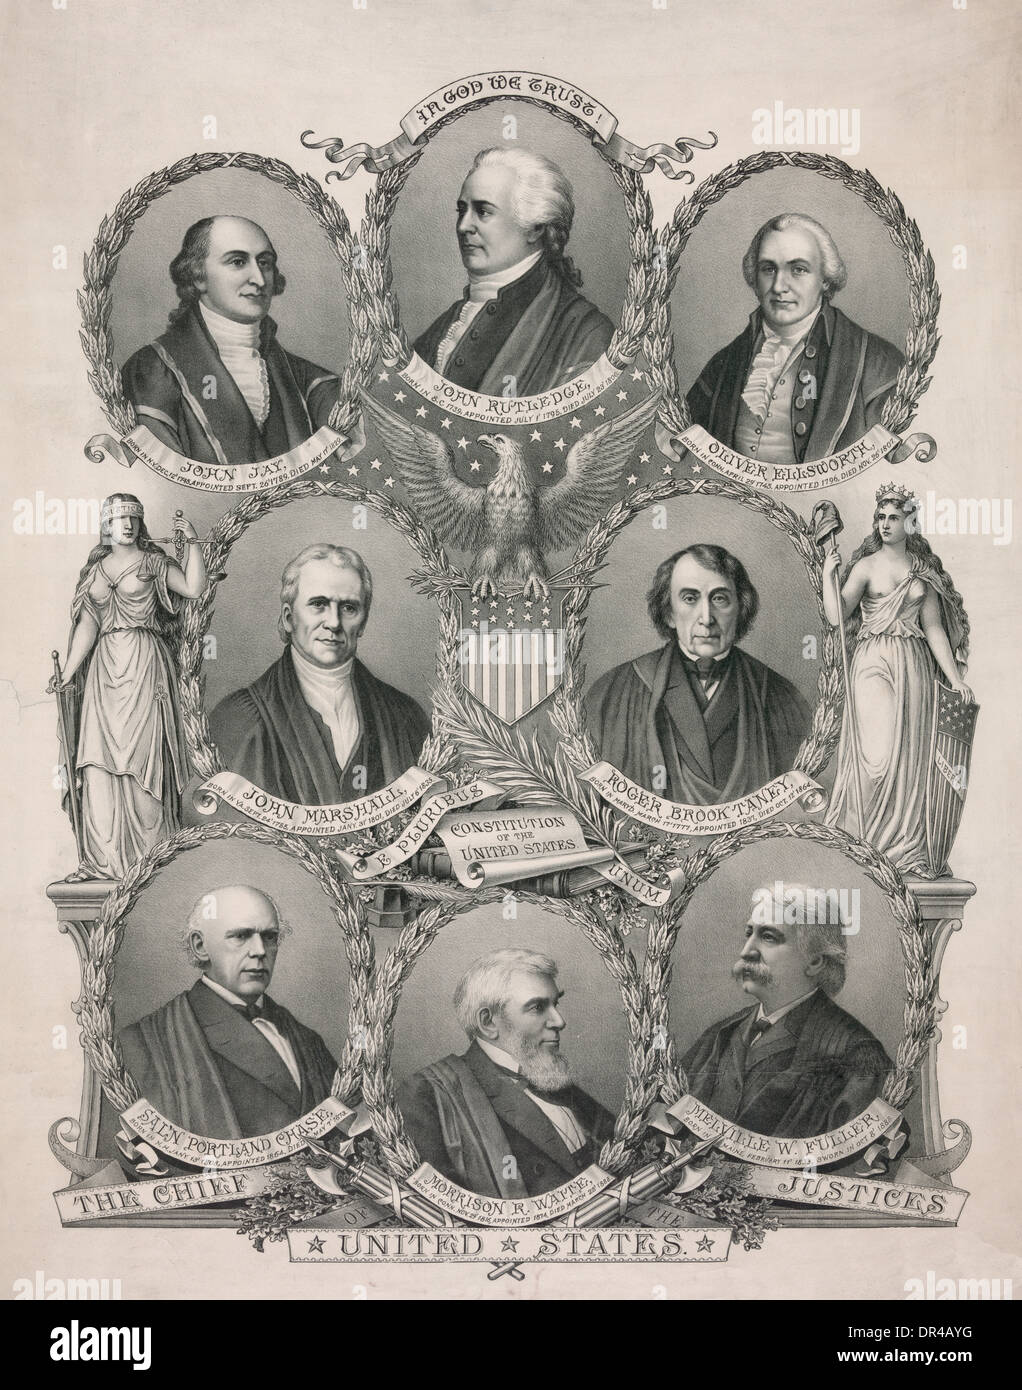 Head-and-shoulders portraits in ovals of the Chief Justices of the Supreme Court flanked by allegorical female figures of Justice and Liberty. Justices include: John Jay, John Rutledge, Oliver Ellsworth, John Marshall, Roger Brook Taney, Salmon Portland Chase, Morrison R. Watte and Melville W. Fuller, 1894 Stock Photo